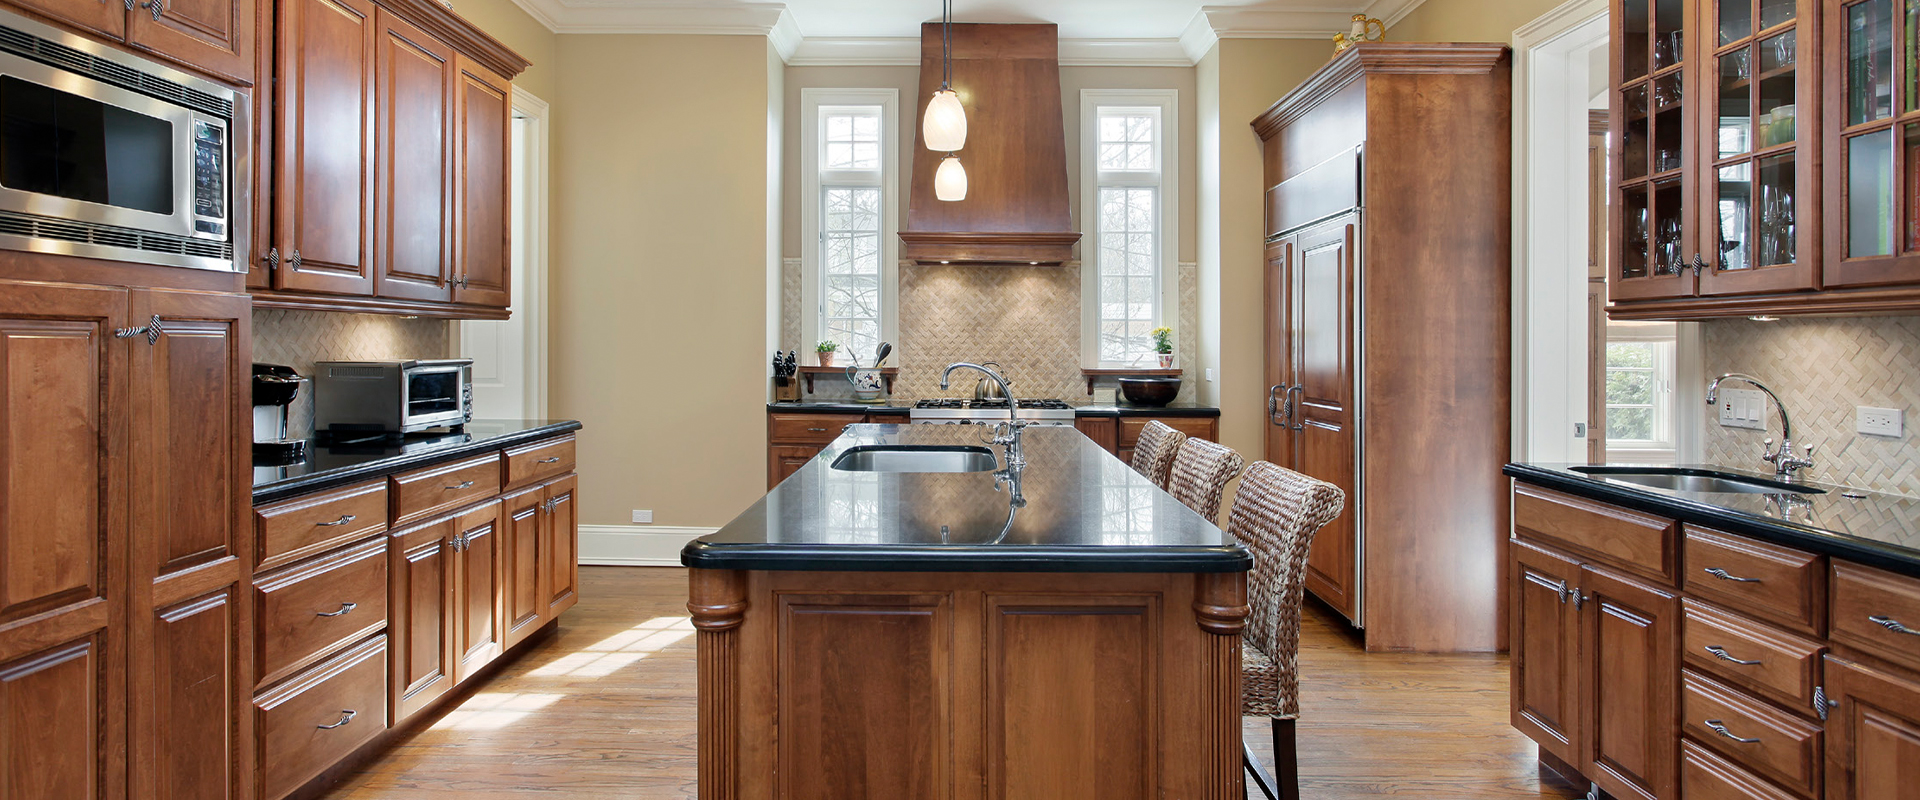 Twin Cities Cabinet Refacing, Design, Installation